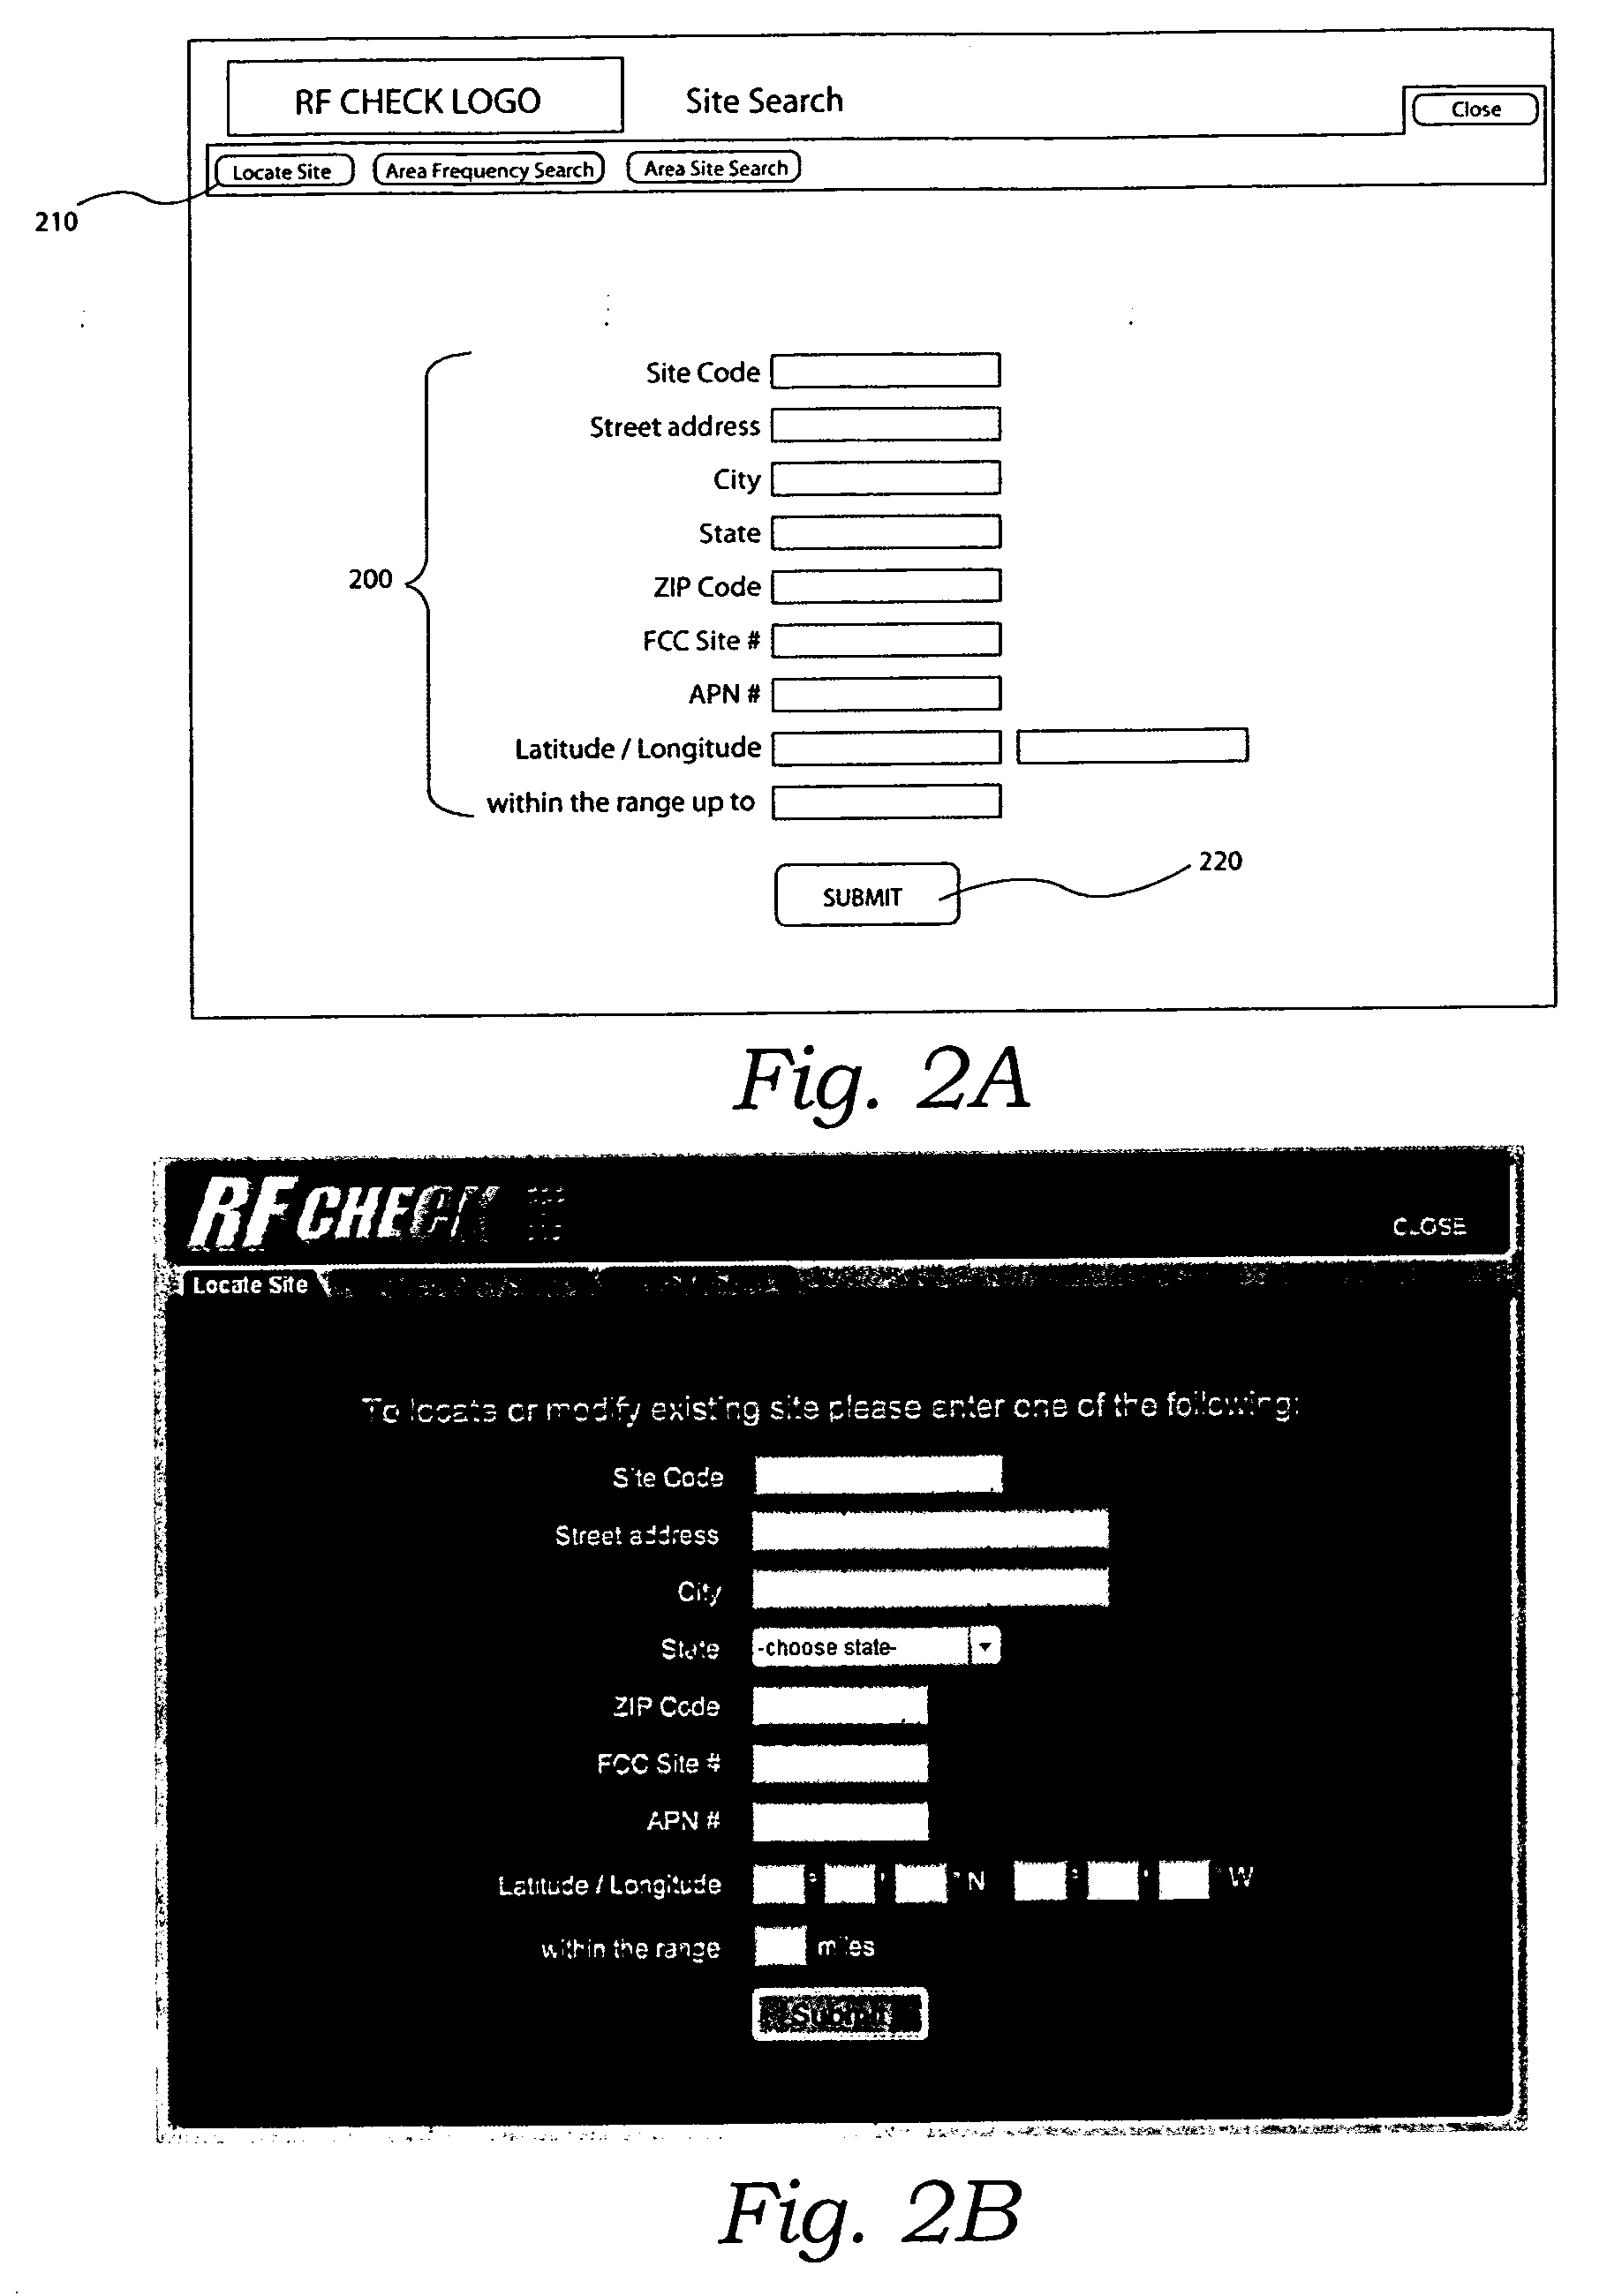 Interactive graphical user interface for an internet site providing data related to radio frequency emmitters